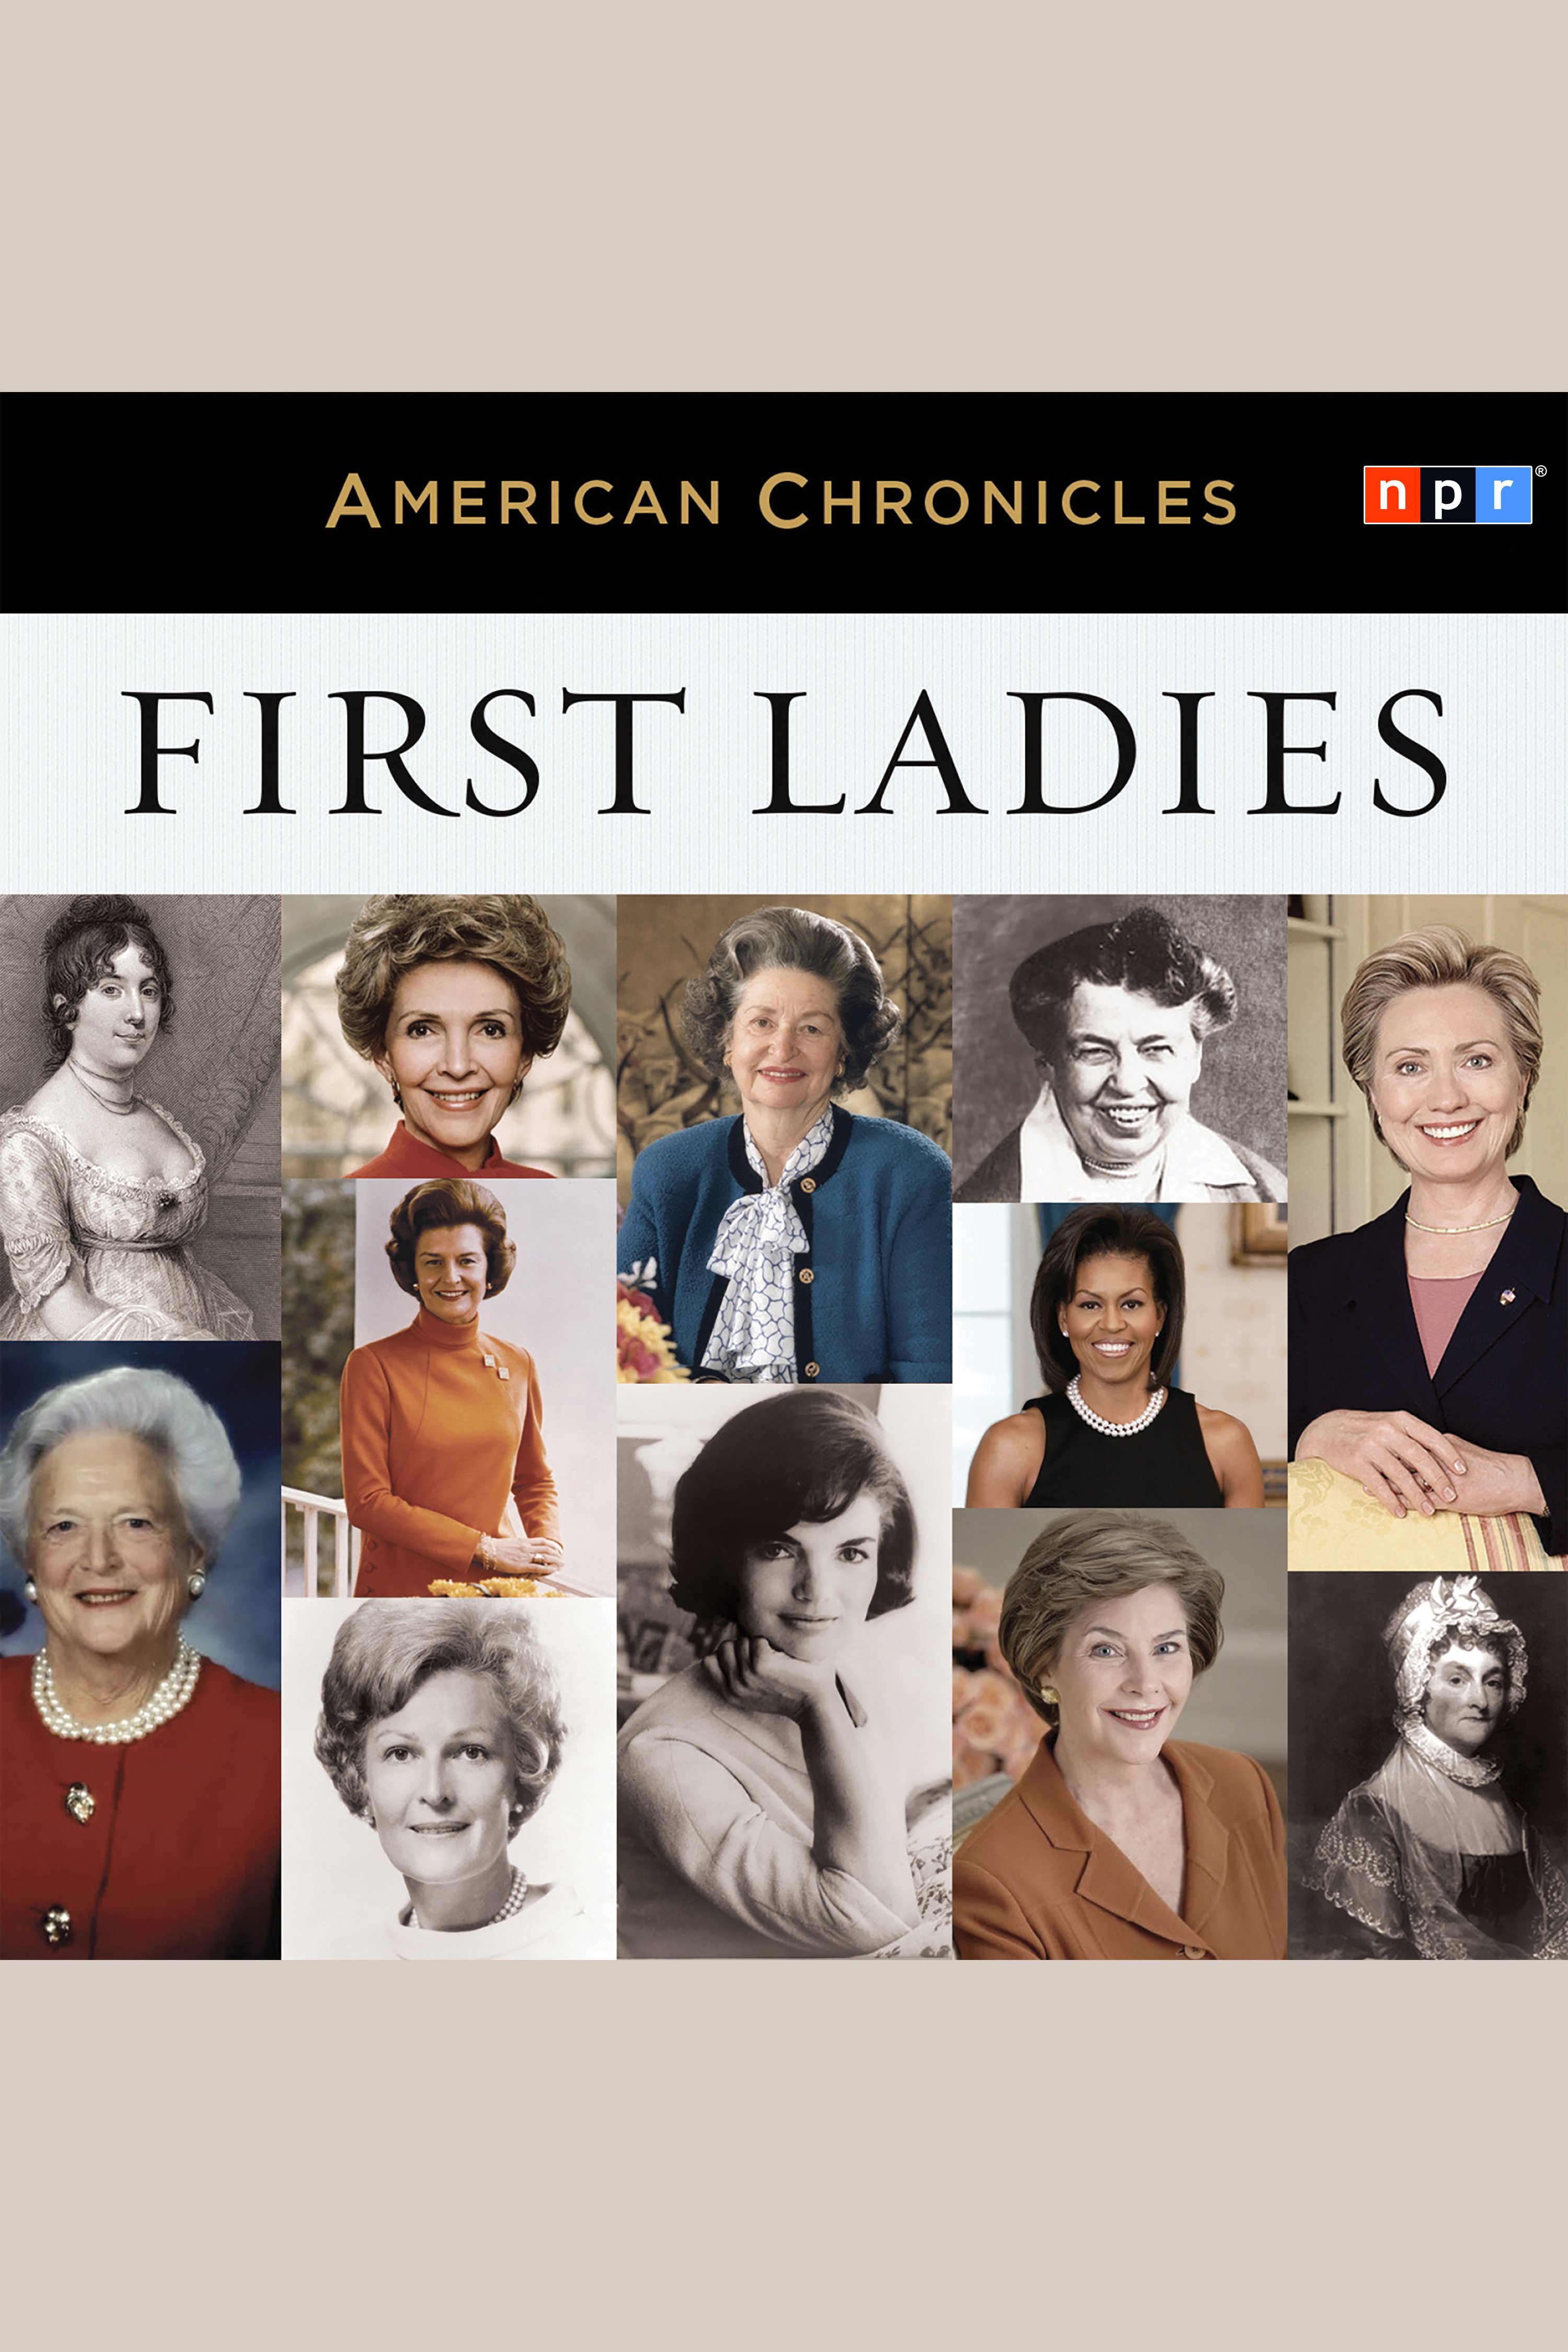 Link to NPR American chronicles first ladies in the catalog